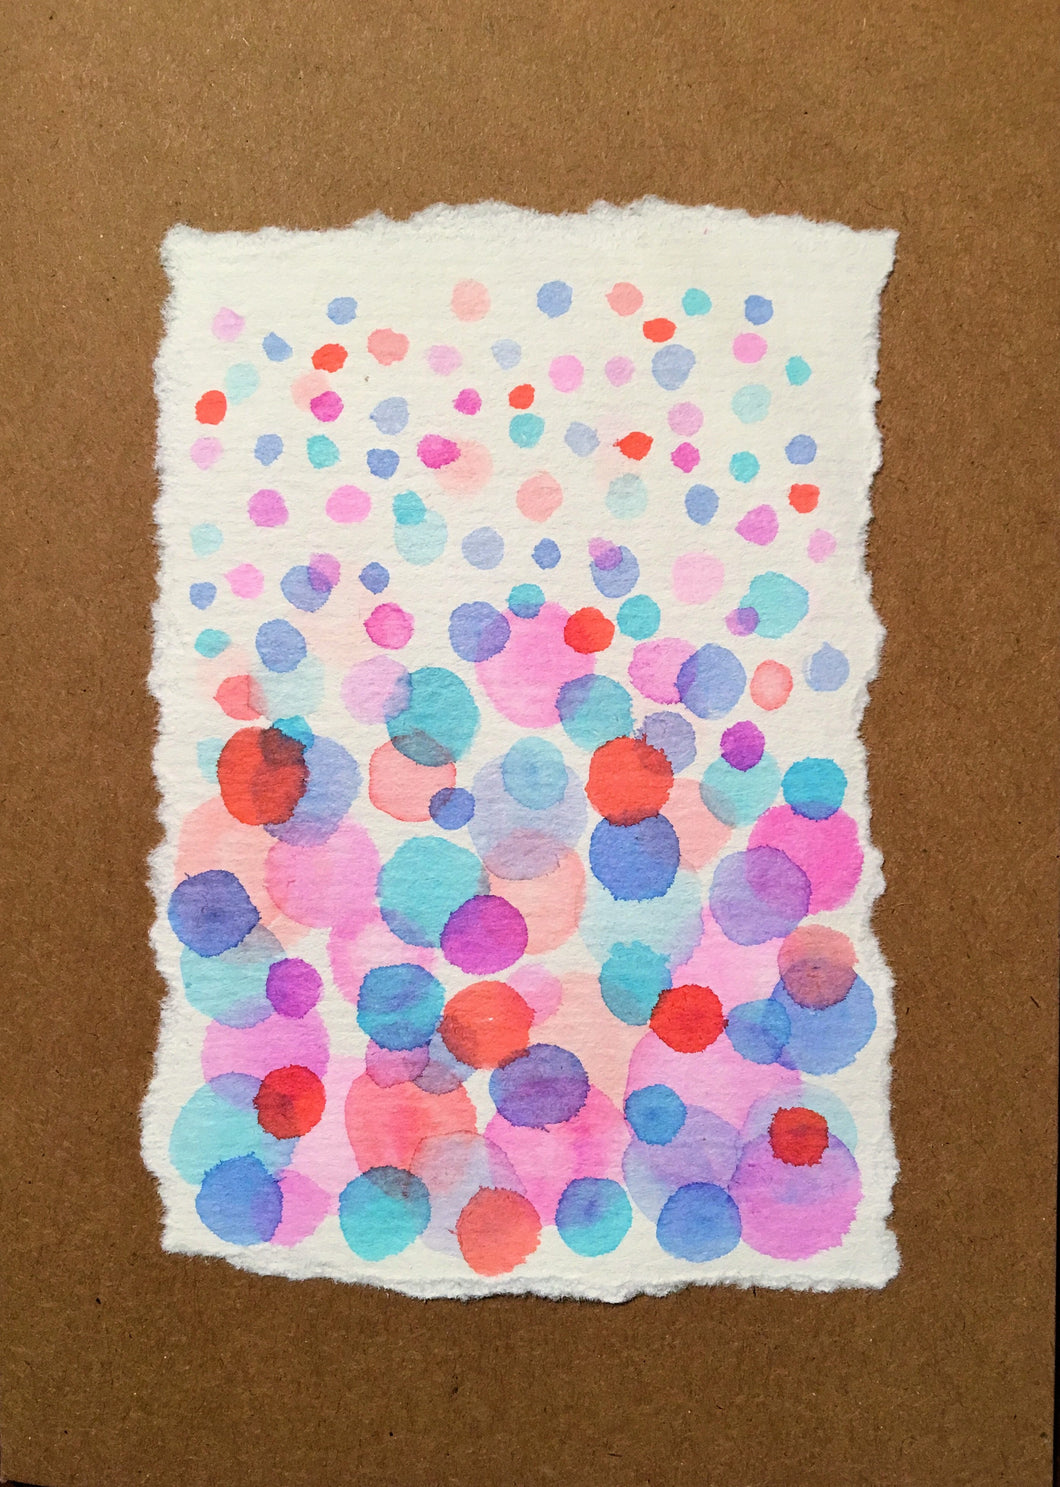 Handpainted Watercolour Greeting Card - Abstract Bubbles Blue/Pink/Purple/Turquoise - eDgE dEsiGn London